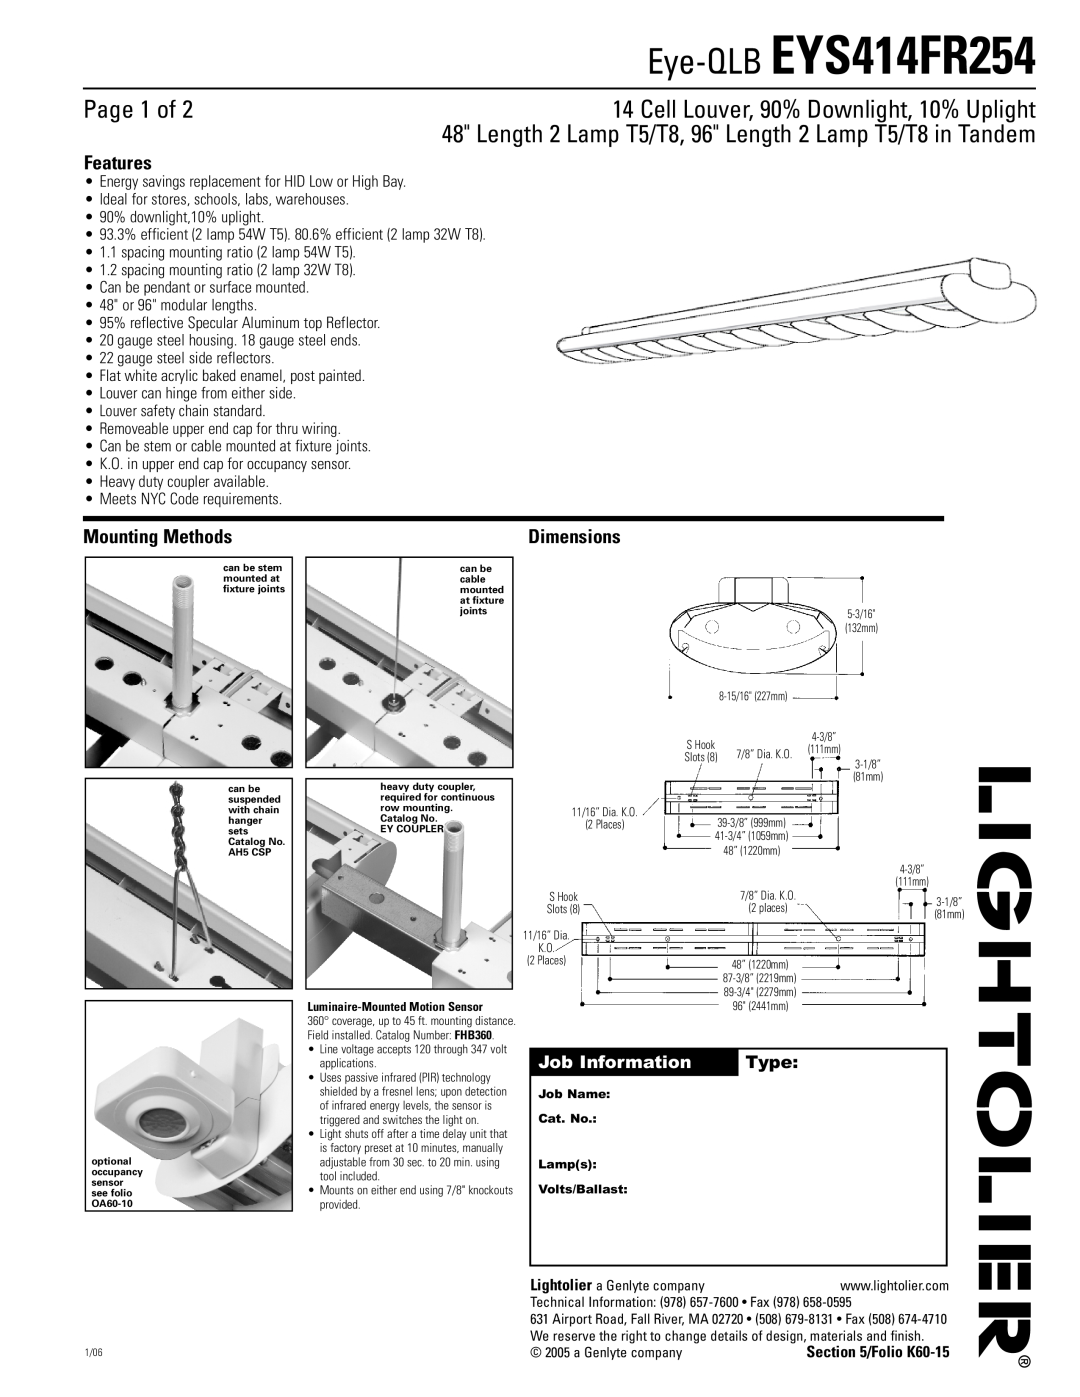 Lightolier dimensions Eye-QLB EYS414FR254, Page 1 of, Cell Louver, 90% Downlight, 10% Uplight, Features, Dimensions 